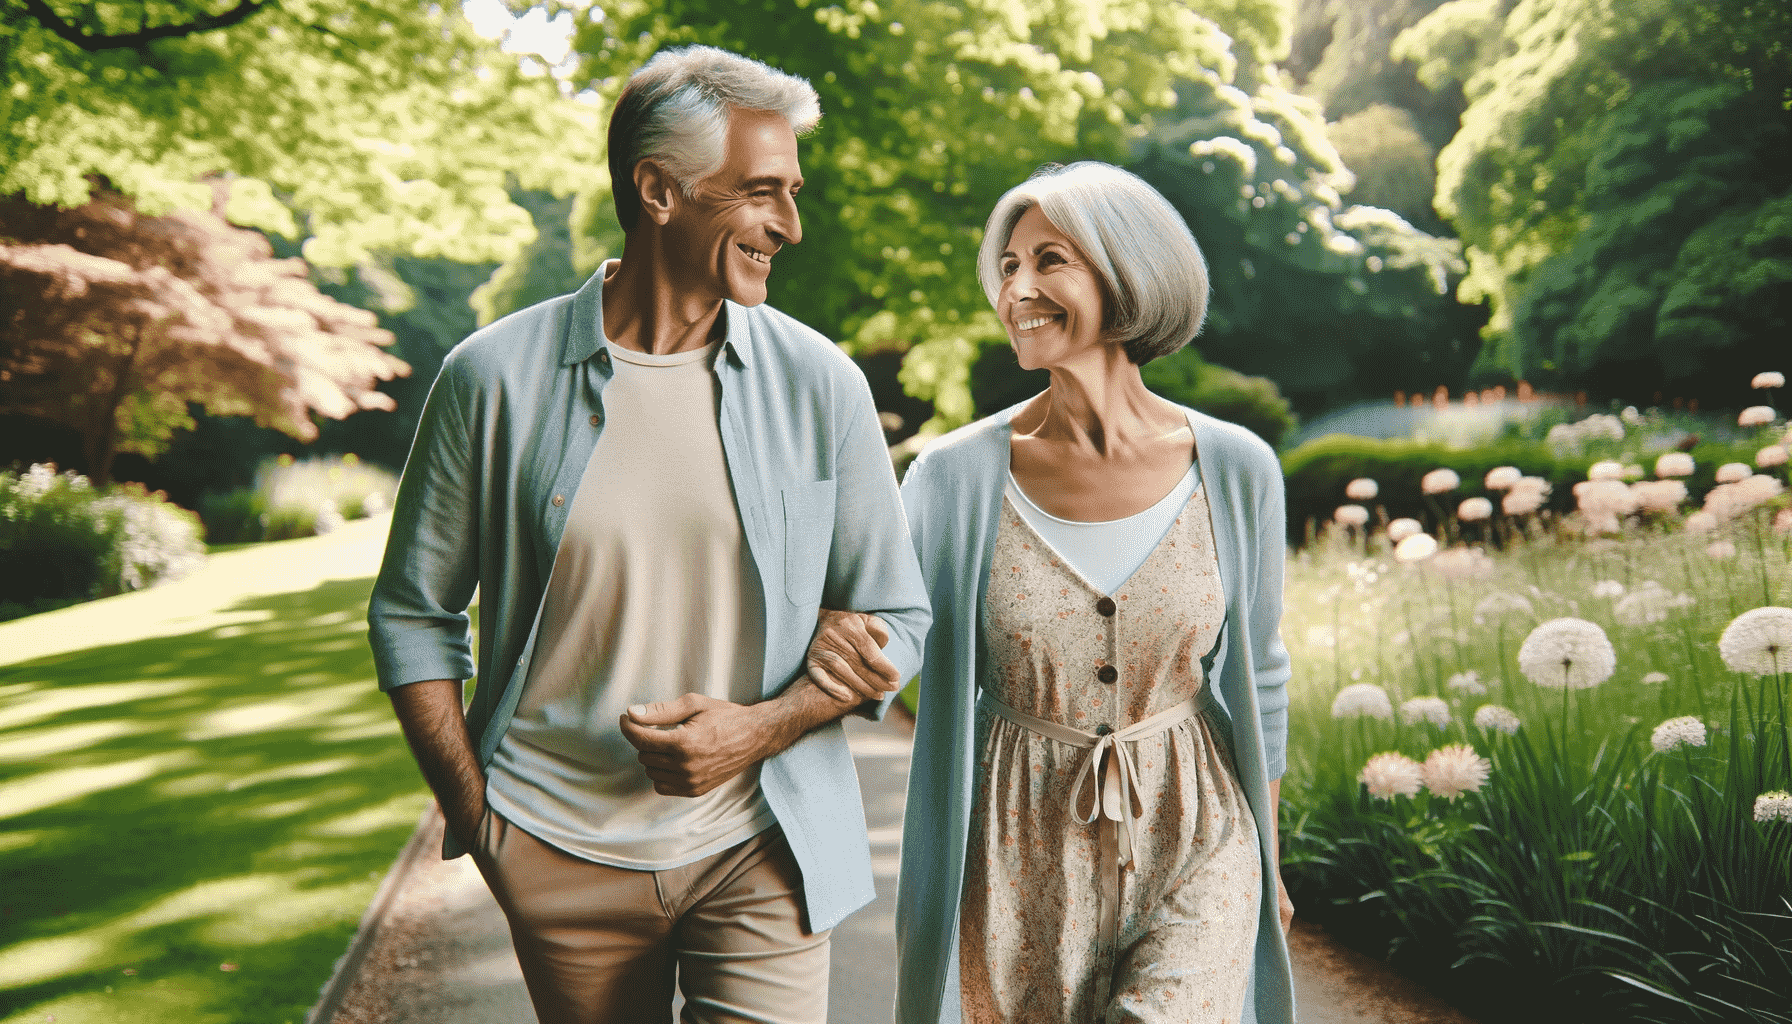 red flags dating in your 60s